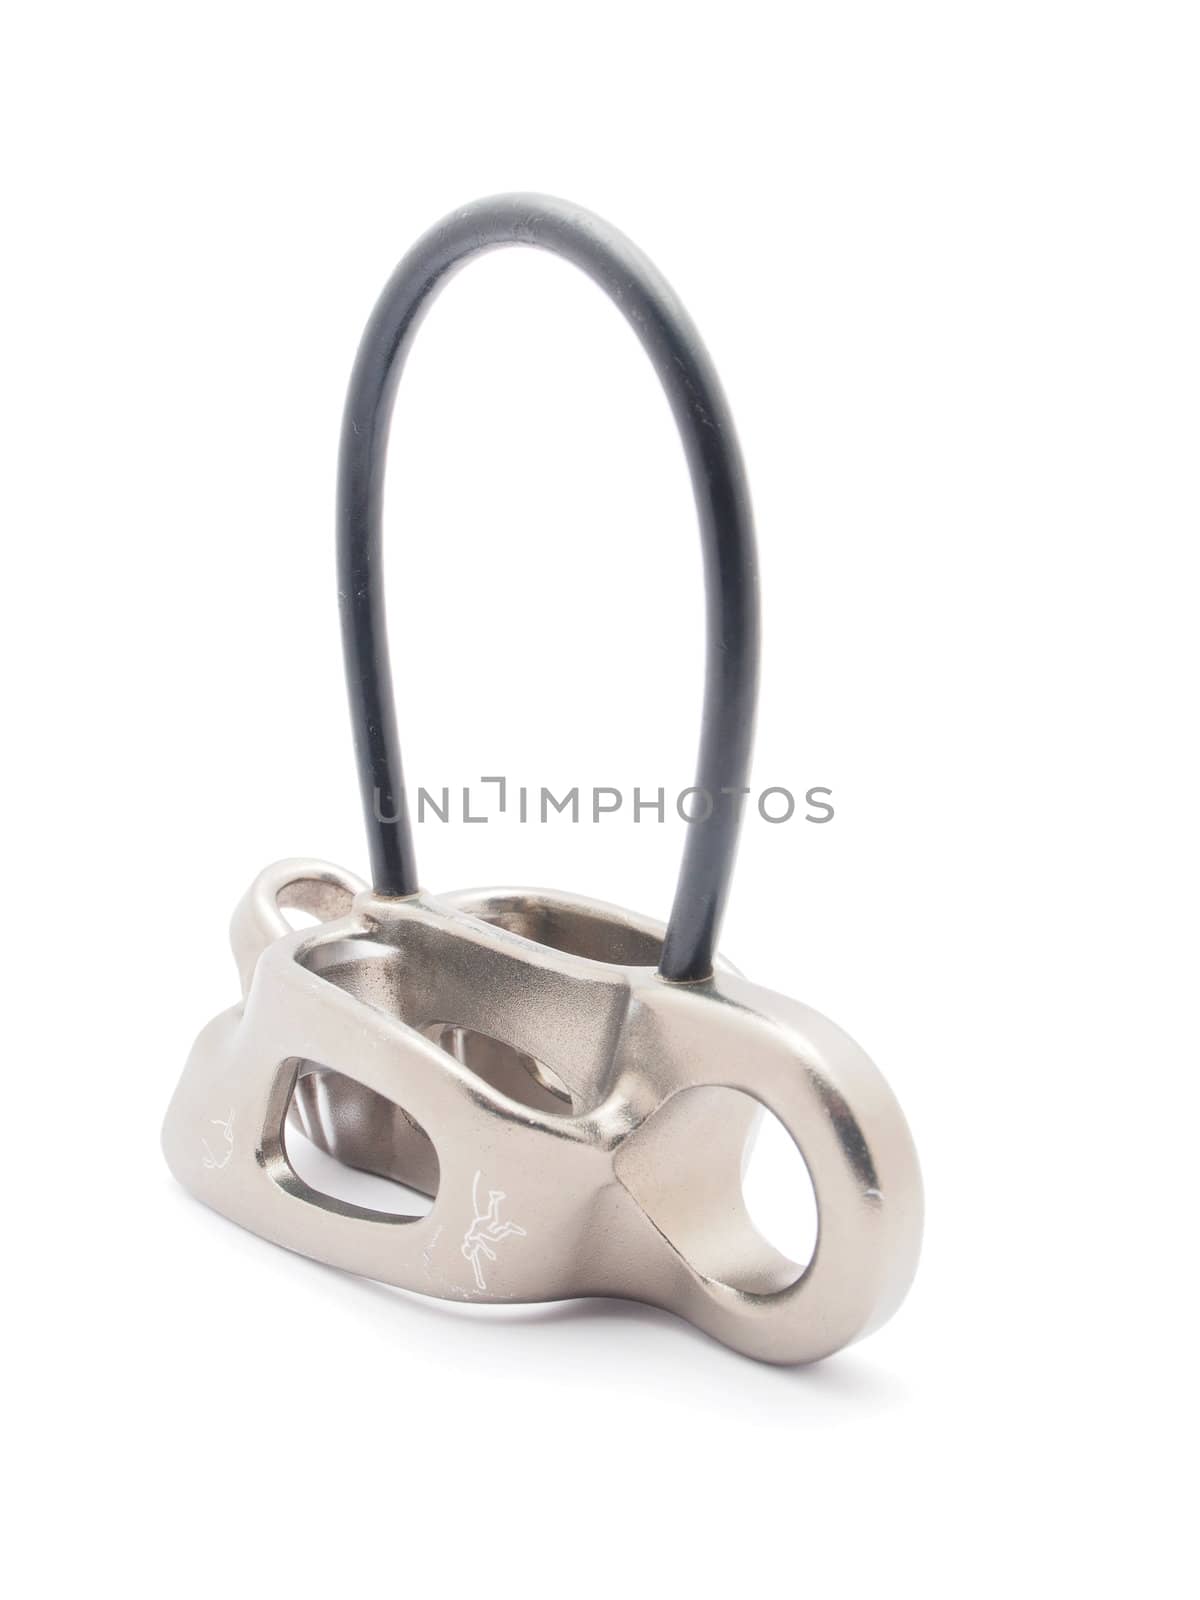 climbing carabiner on a white background by Enskanto